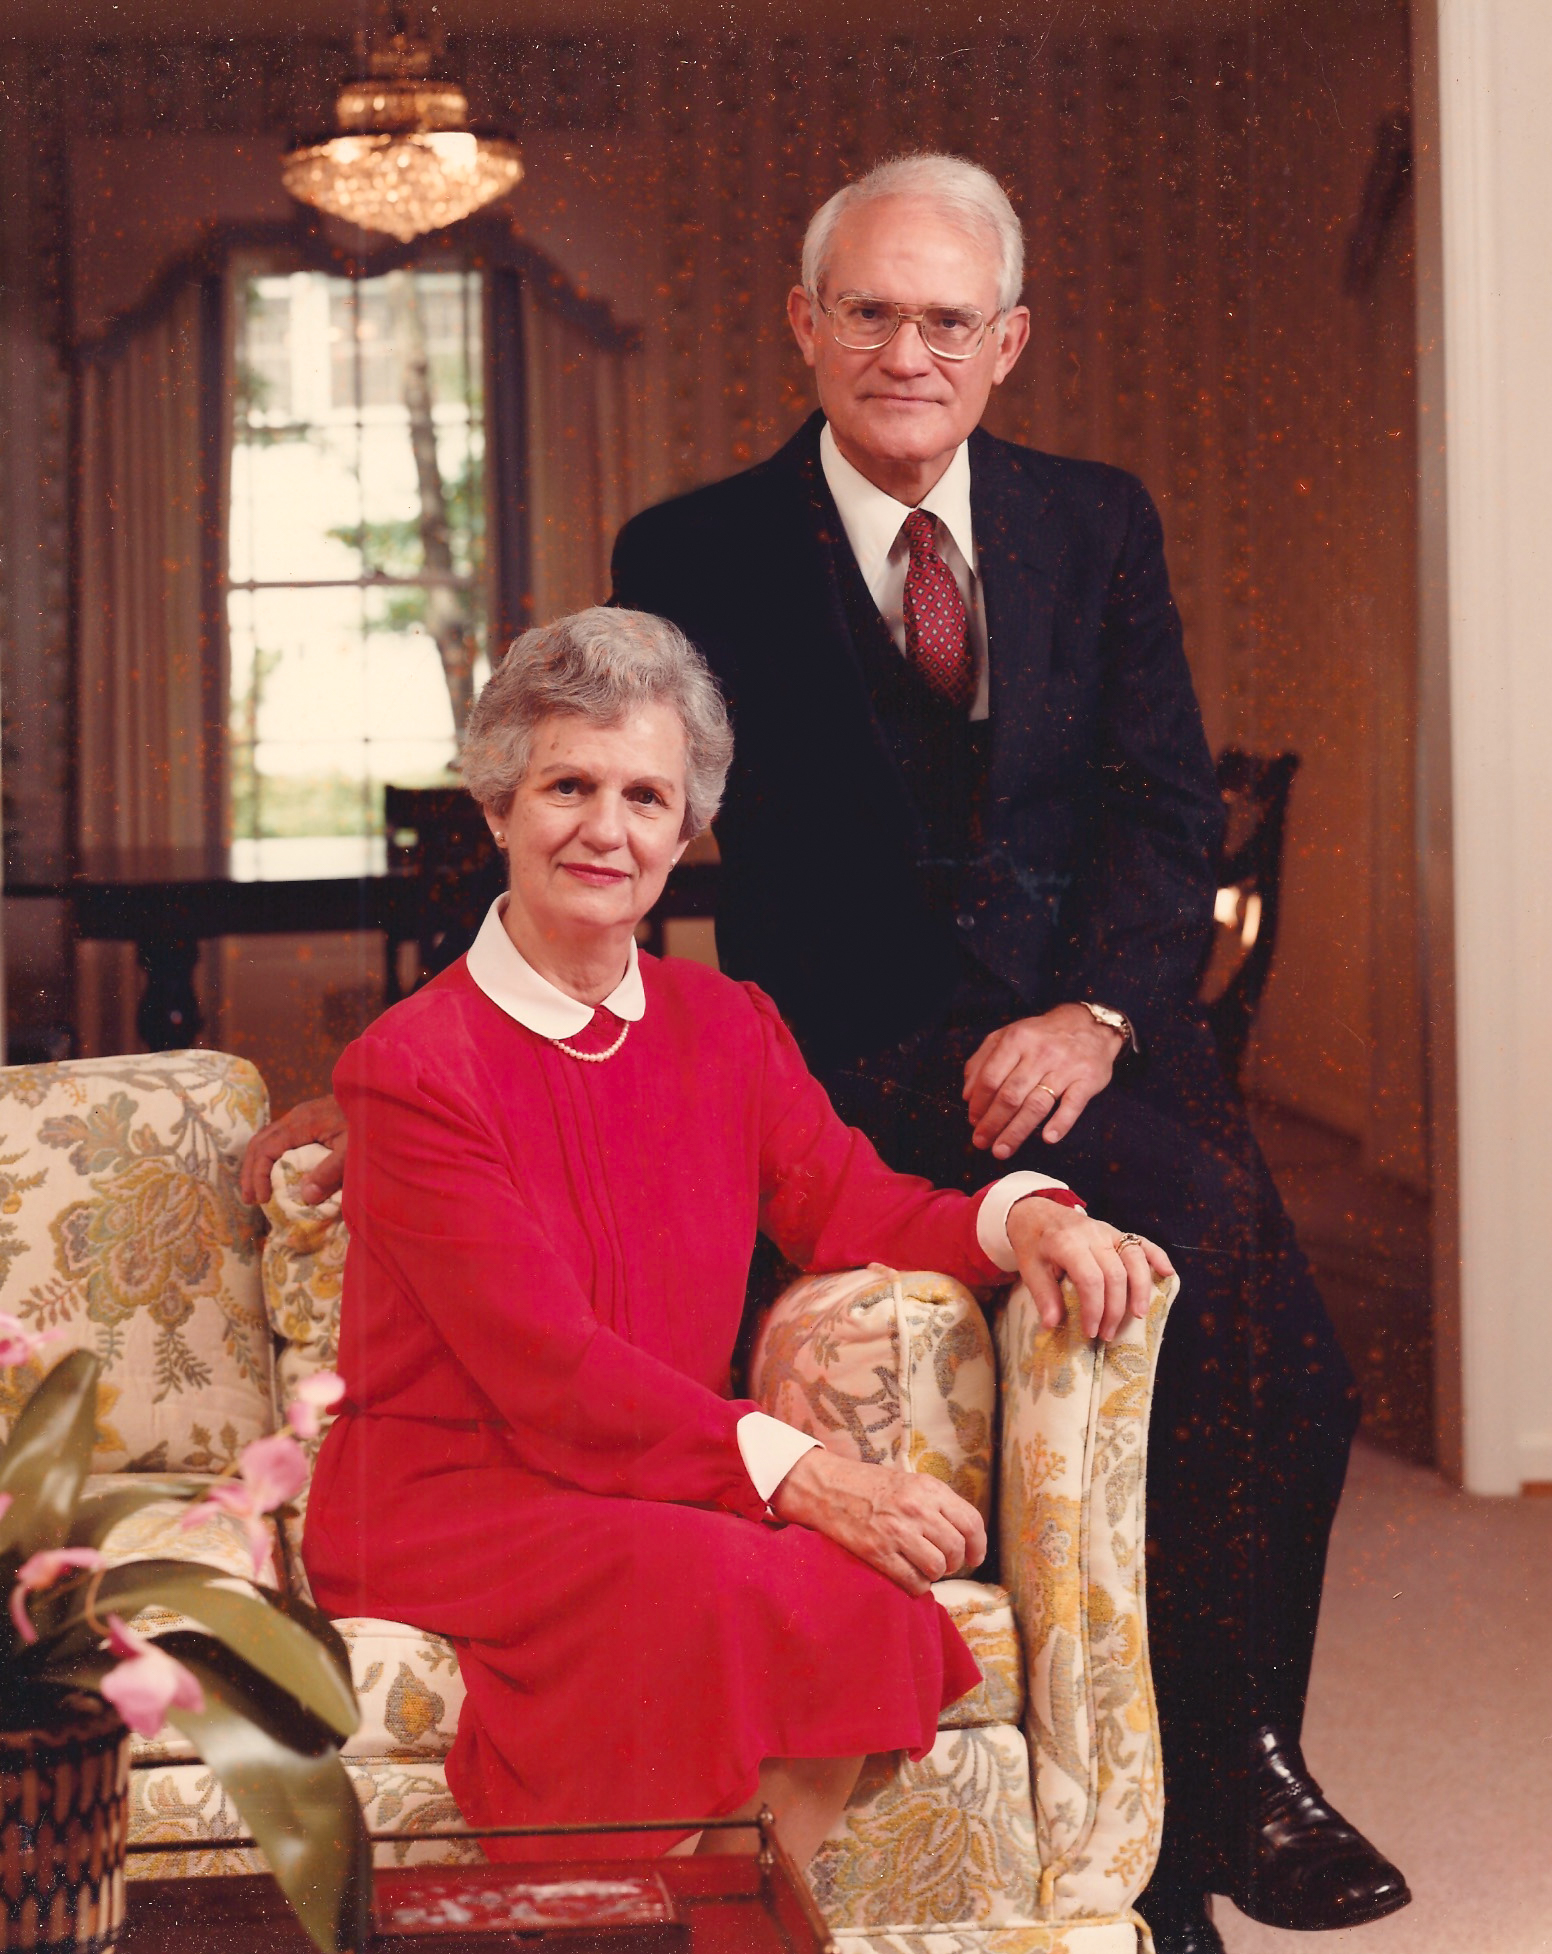 Ed and Sara Arendall at the time of his retirement from the pastorate at Dawson in 1984.  (Courtesy of Mr. Doug Arendall.)